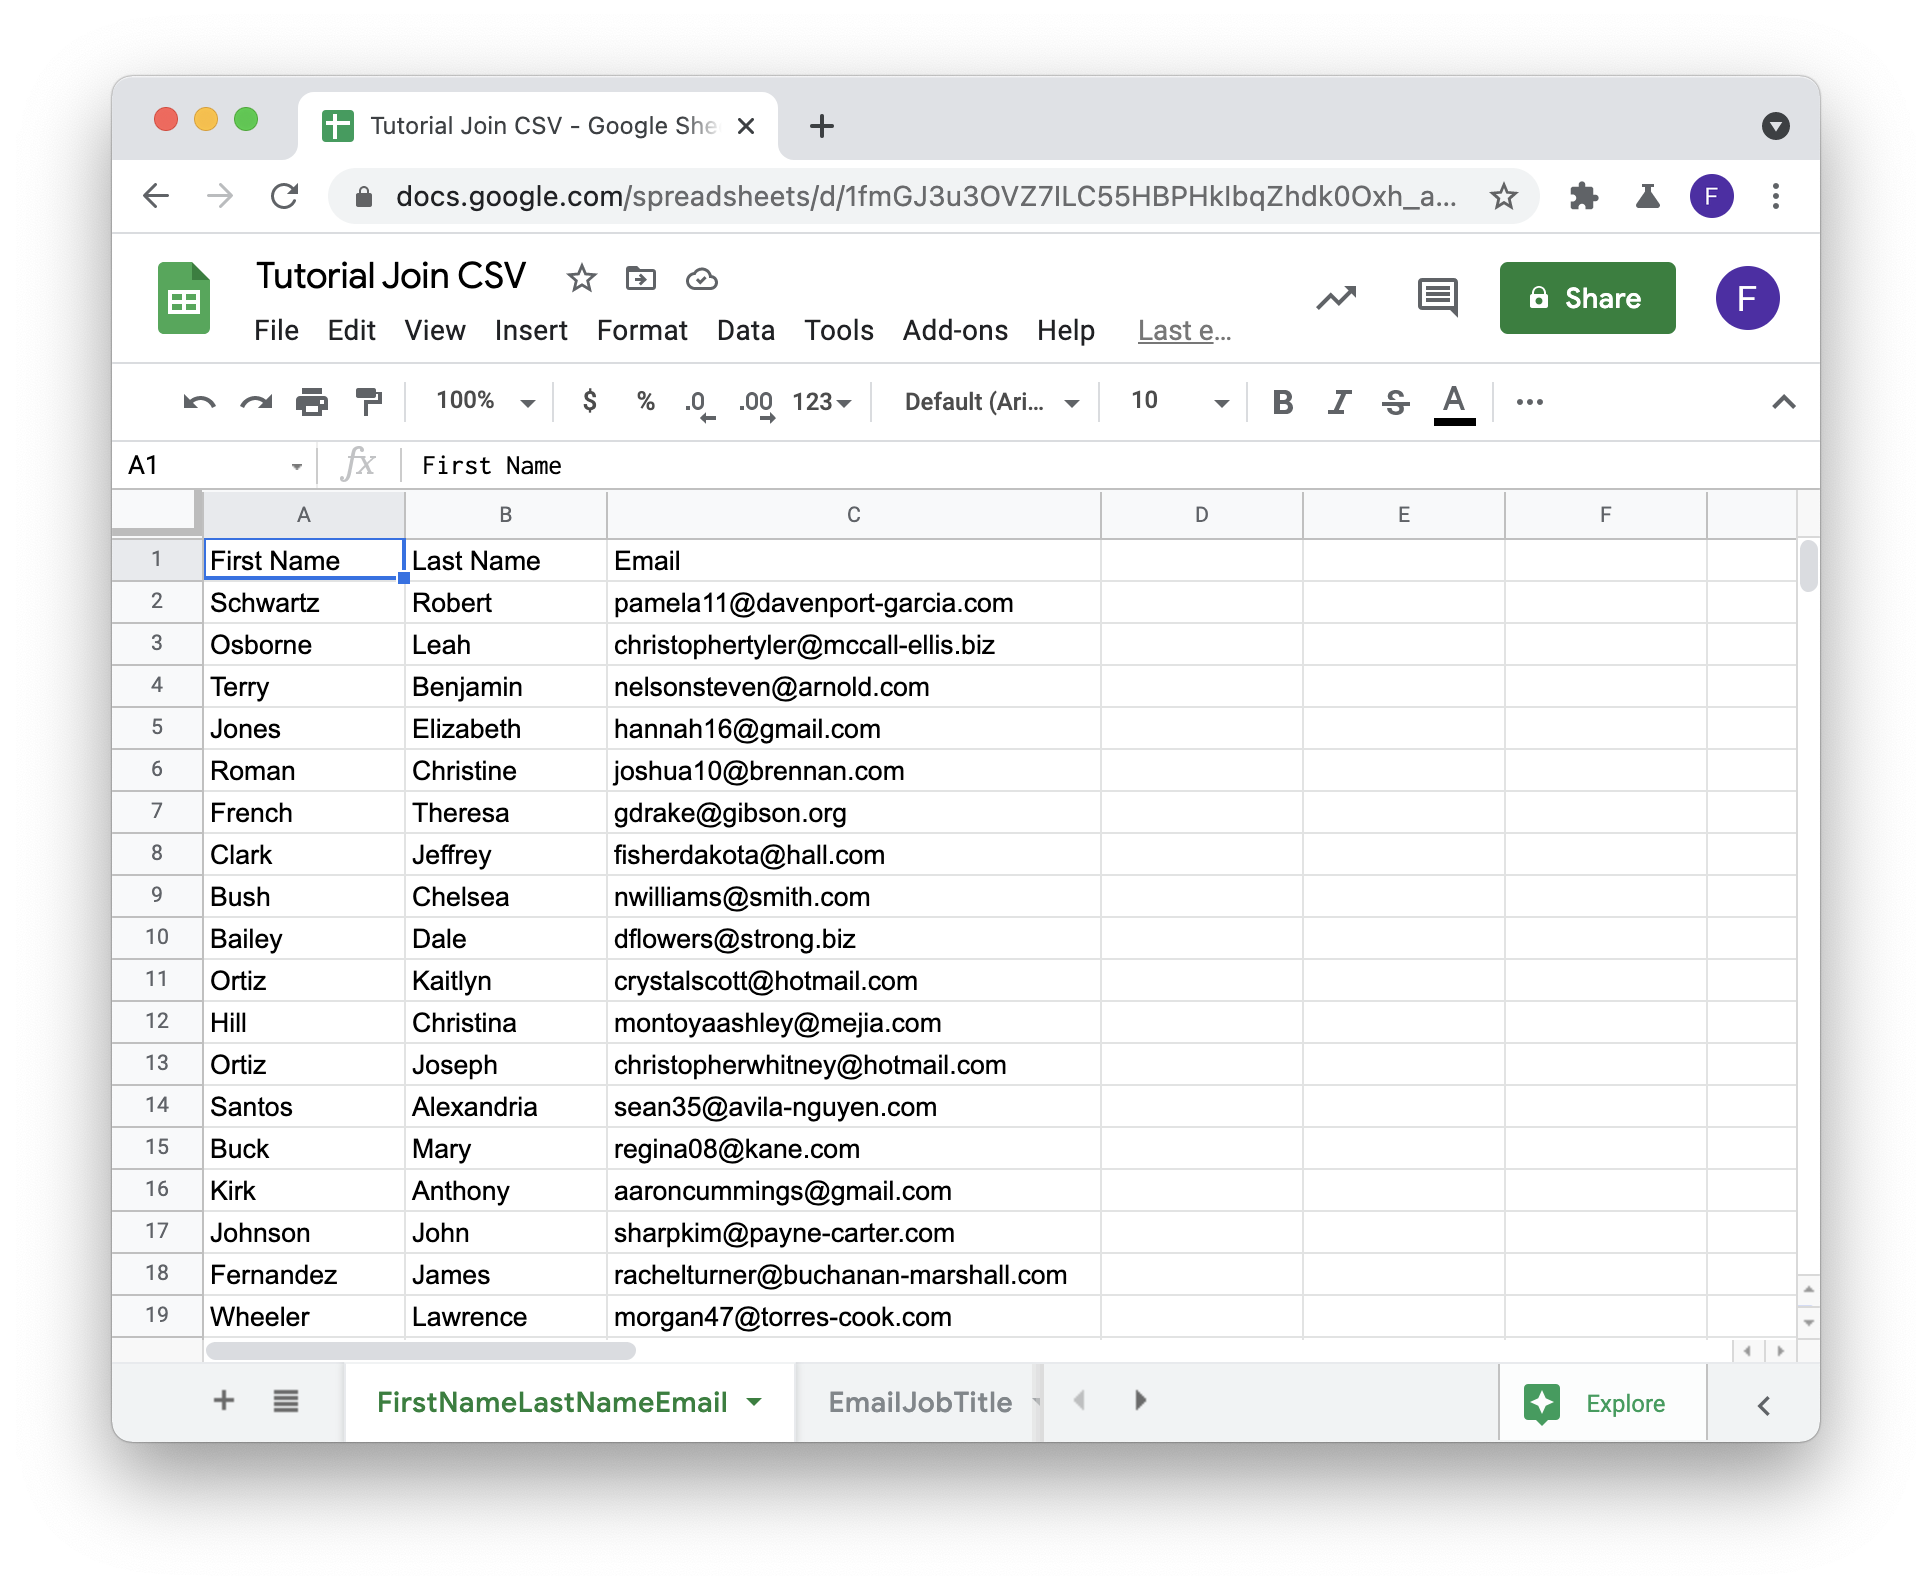 CSV files imported in Google Sheets